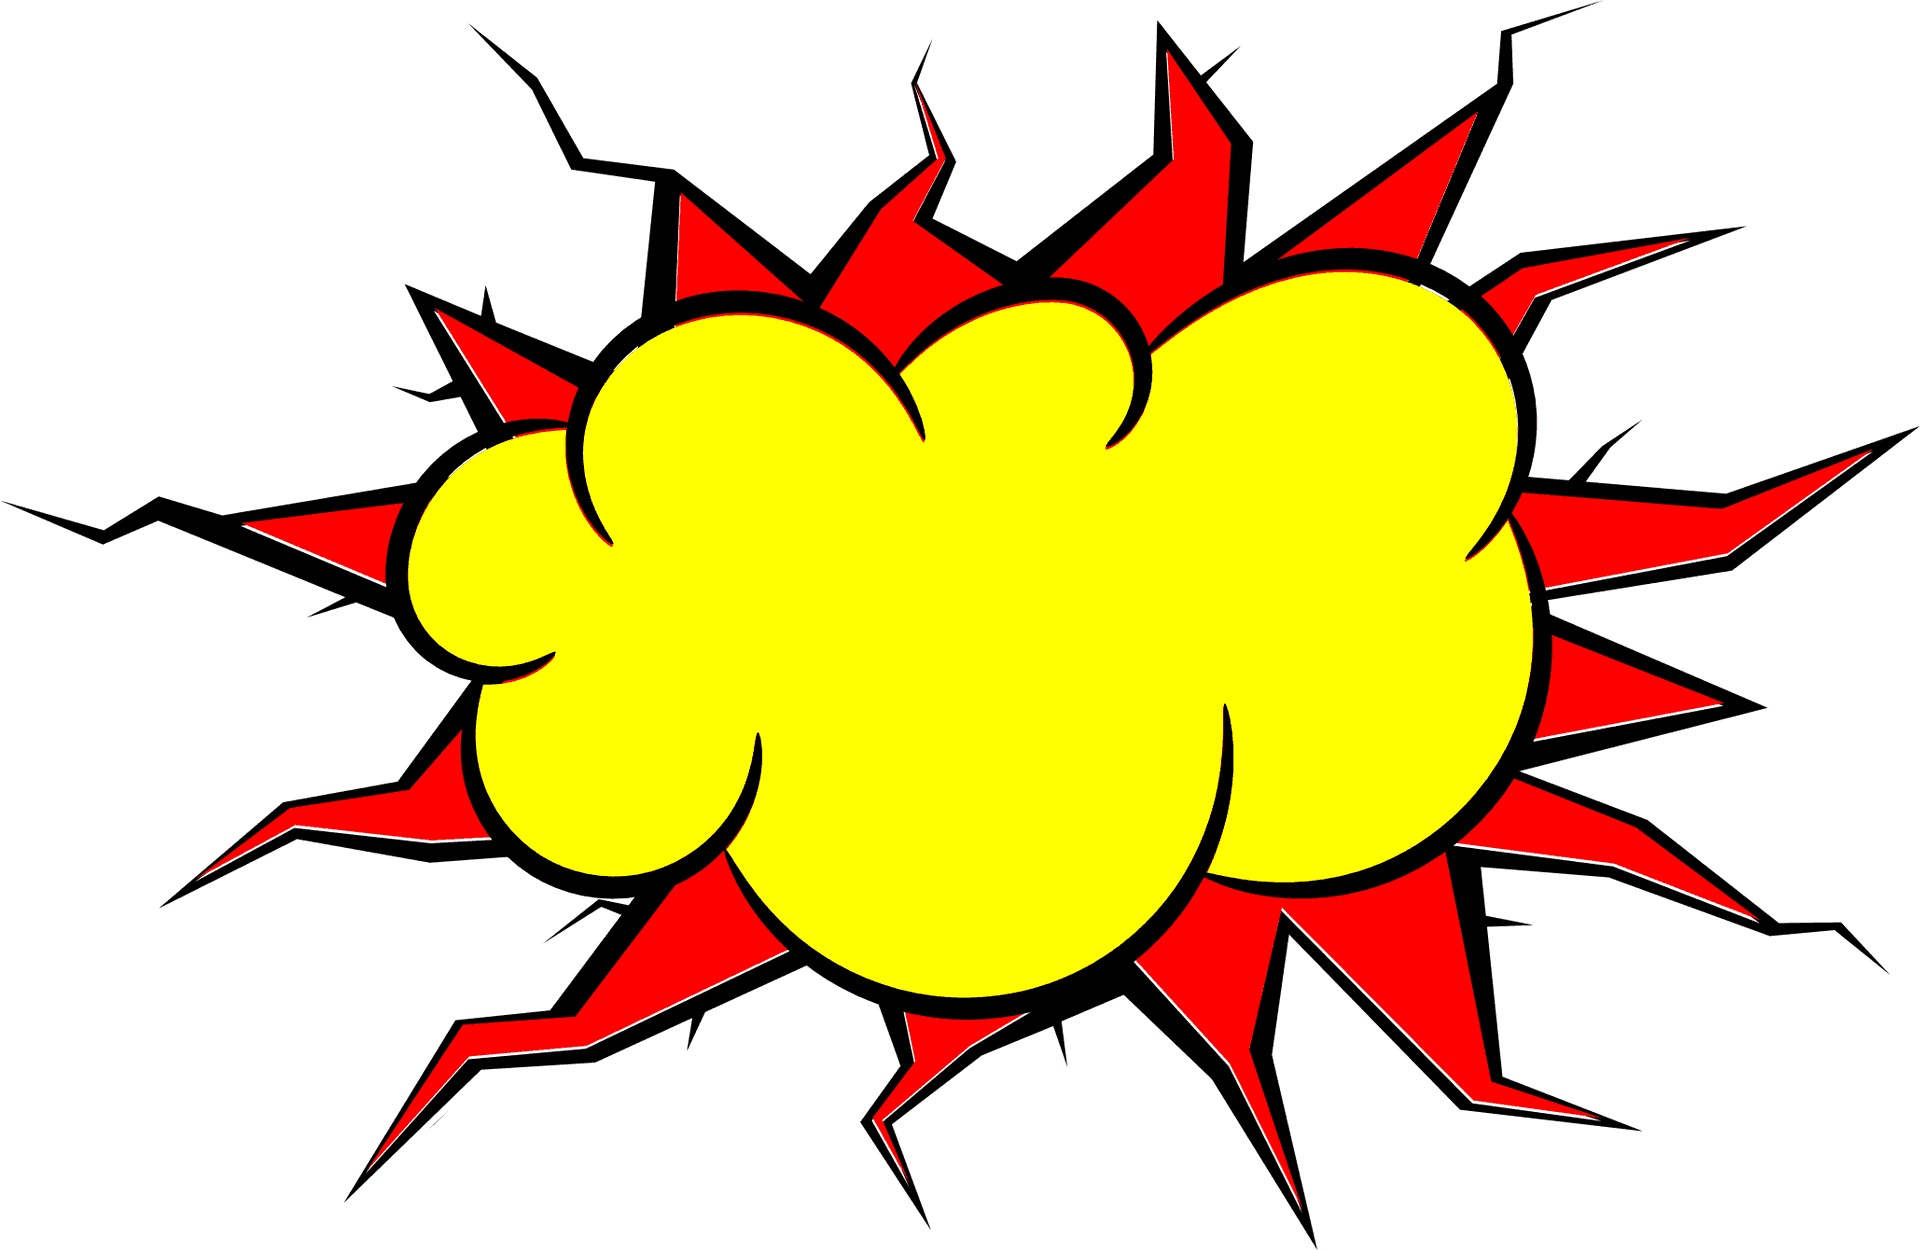 Comic Style Explosion Bubble PNG image